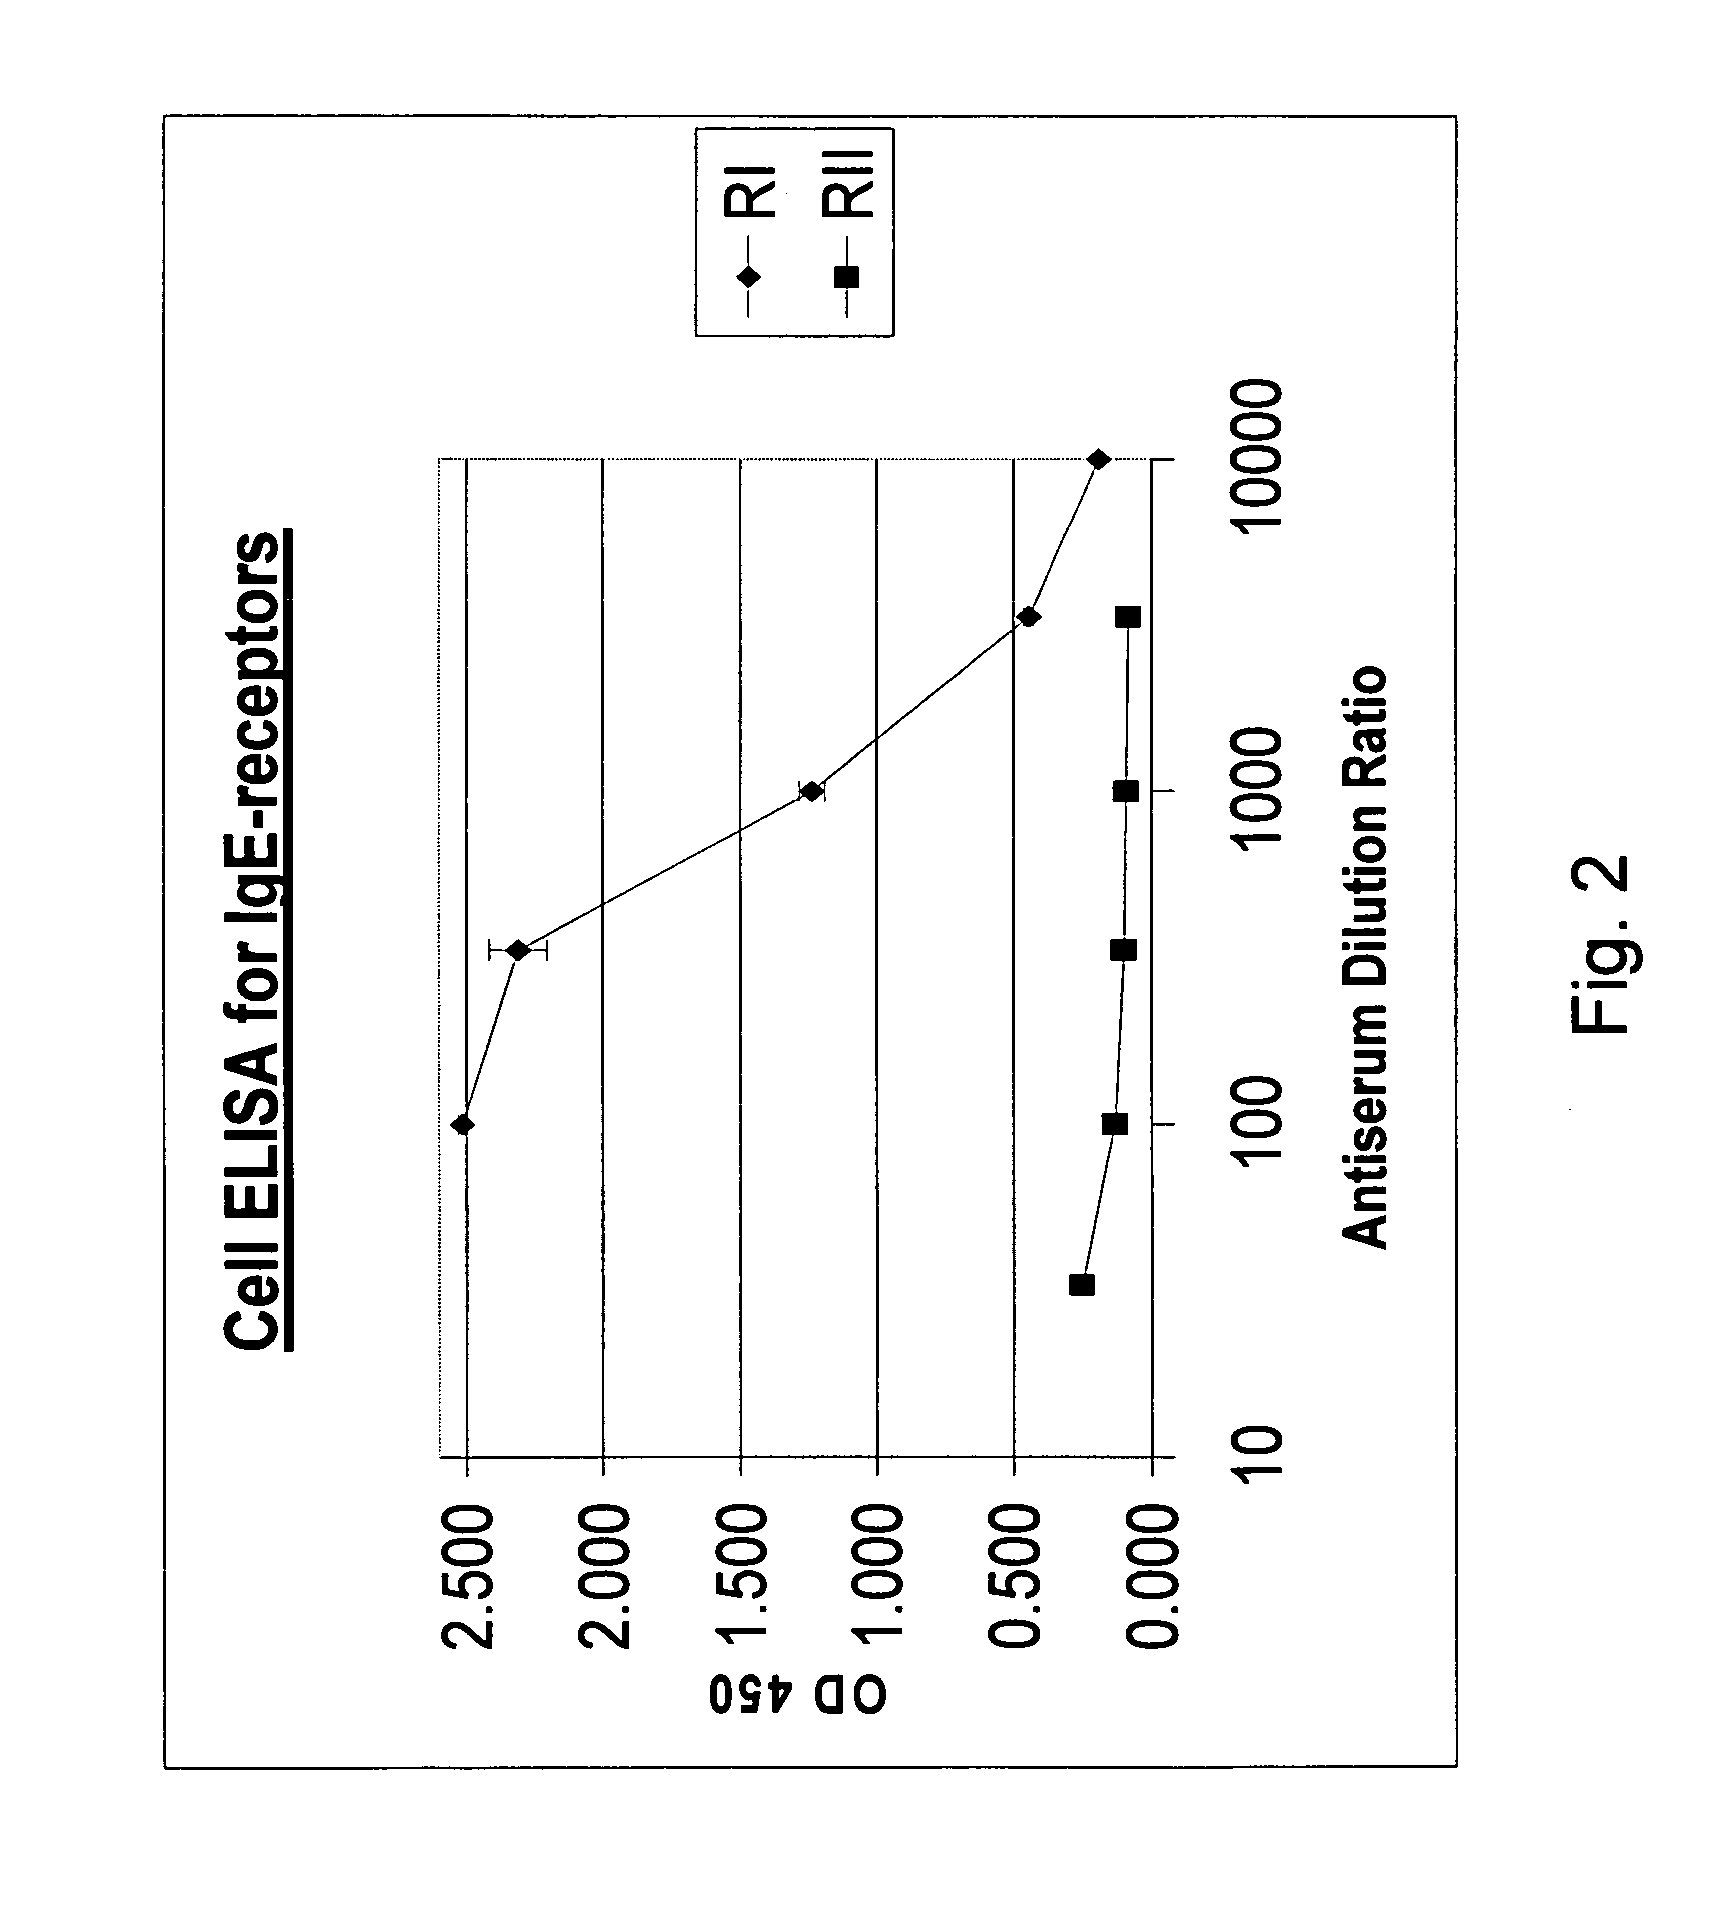 Anti-allergy composition and related method